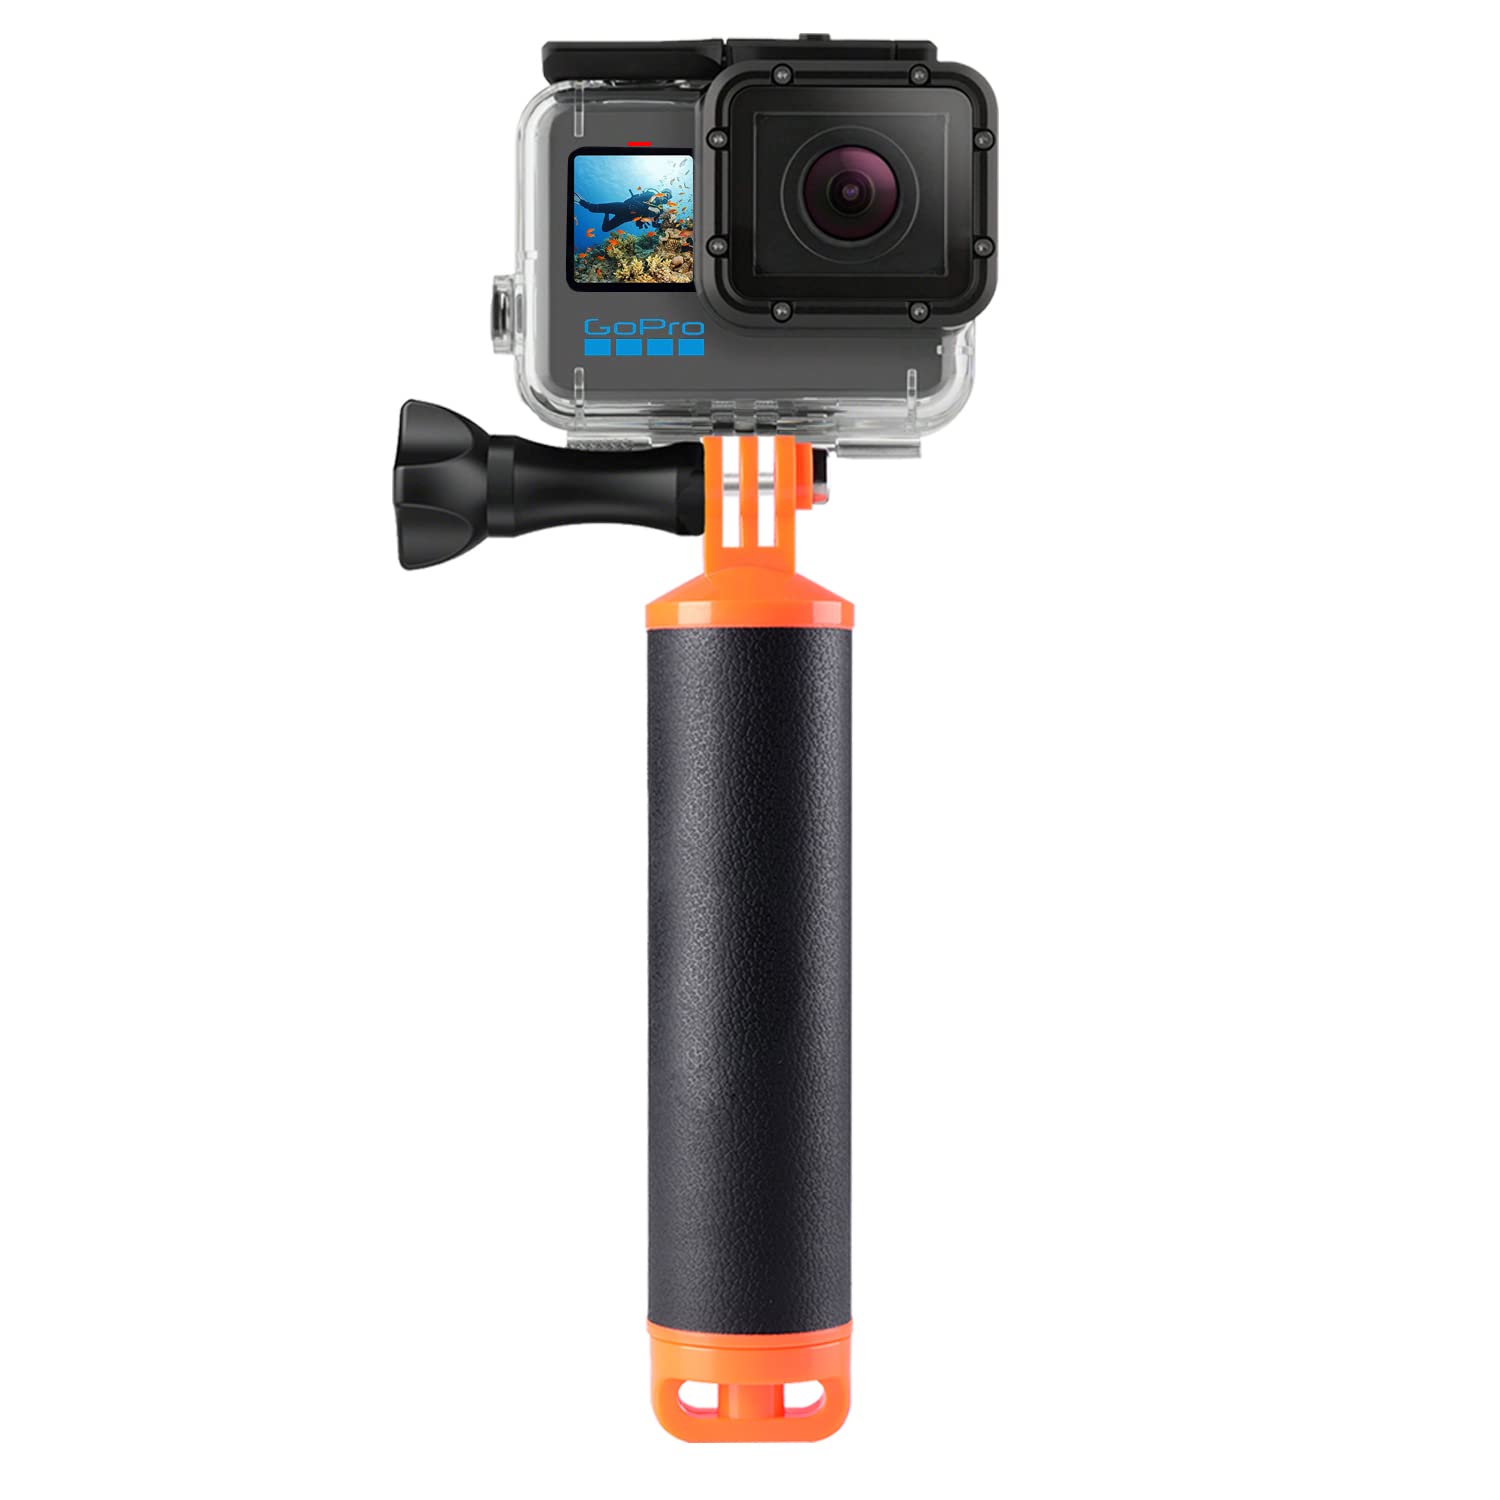 Suptig Floating Hand Grip Handle Mount Pole Mount Handle Mount Accessories For Gopro Hero 11 Hero 10 Hero 9 Hero 8 Hero 7 Hero 6 Hero 5 Hero Hero 4 Hero Session Gopro Max and AKASO Action Cameras